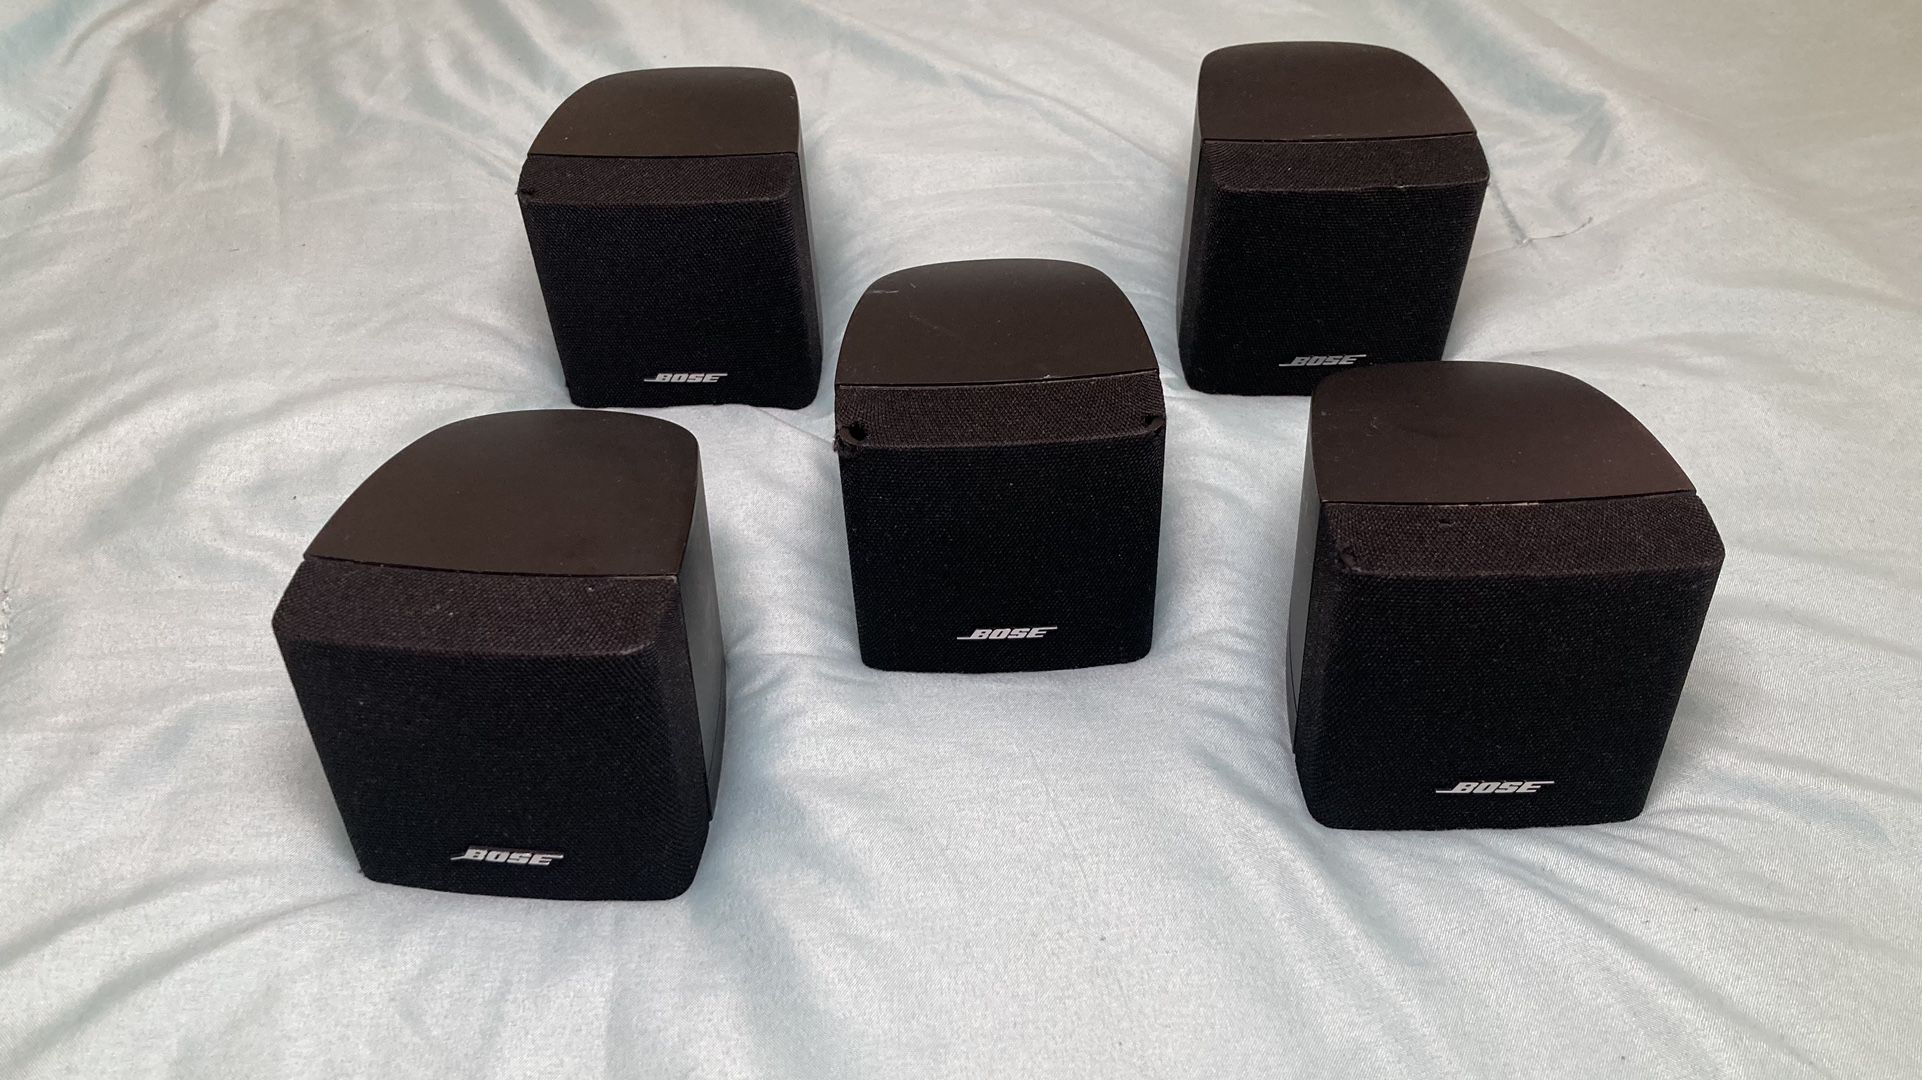 BOSE HOME THEATER SPEAKERS 